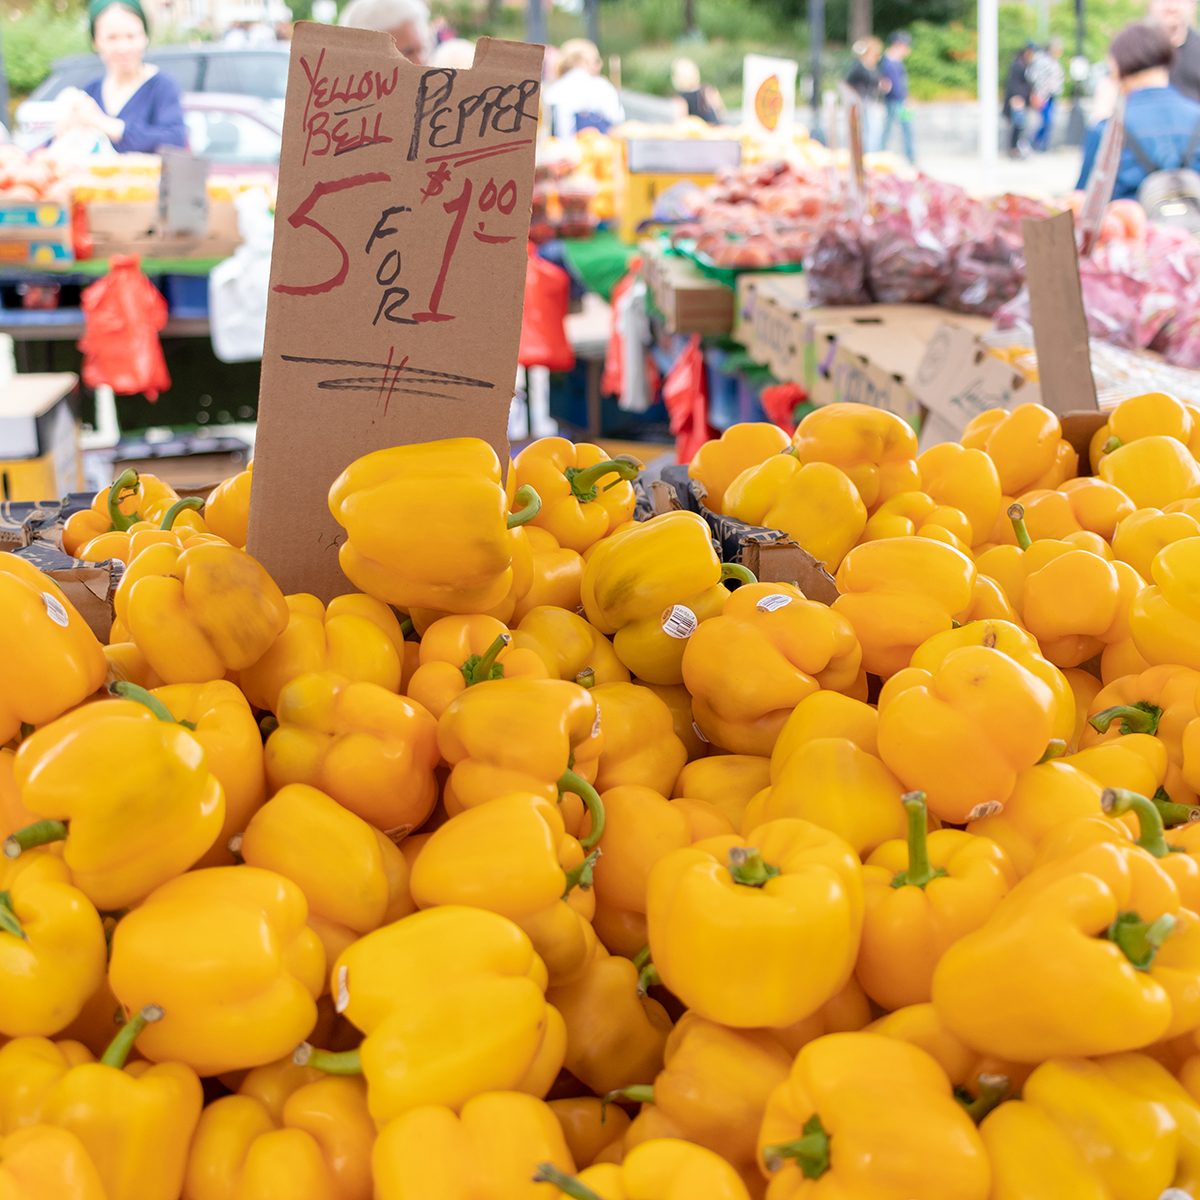 The Healthiest Vegetables You Can Buy at the Farmers’ Market